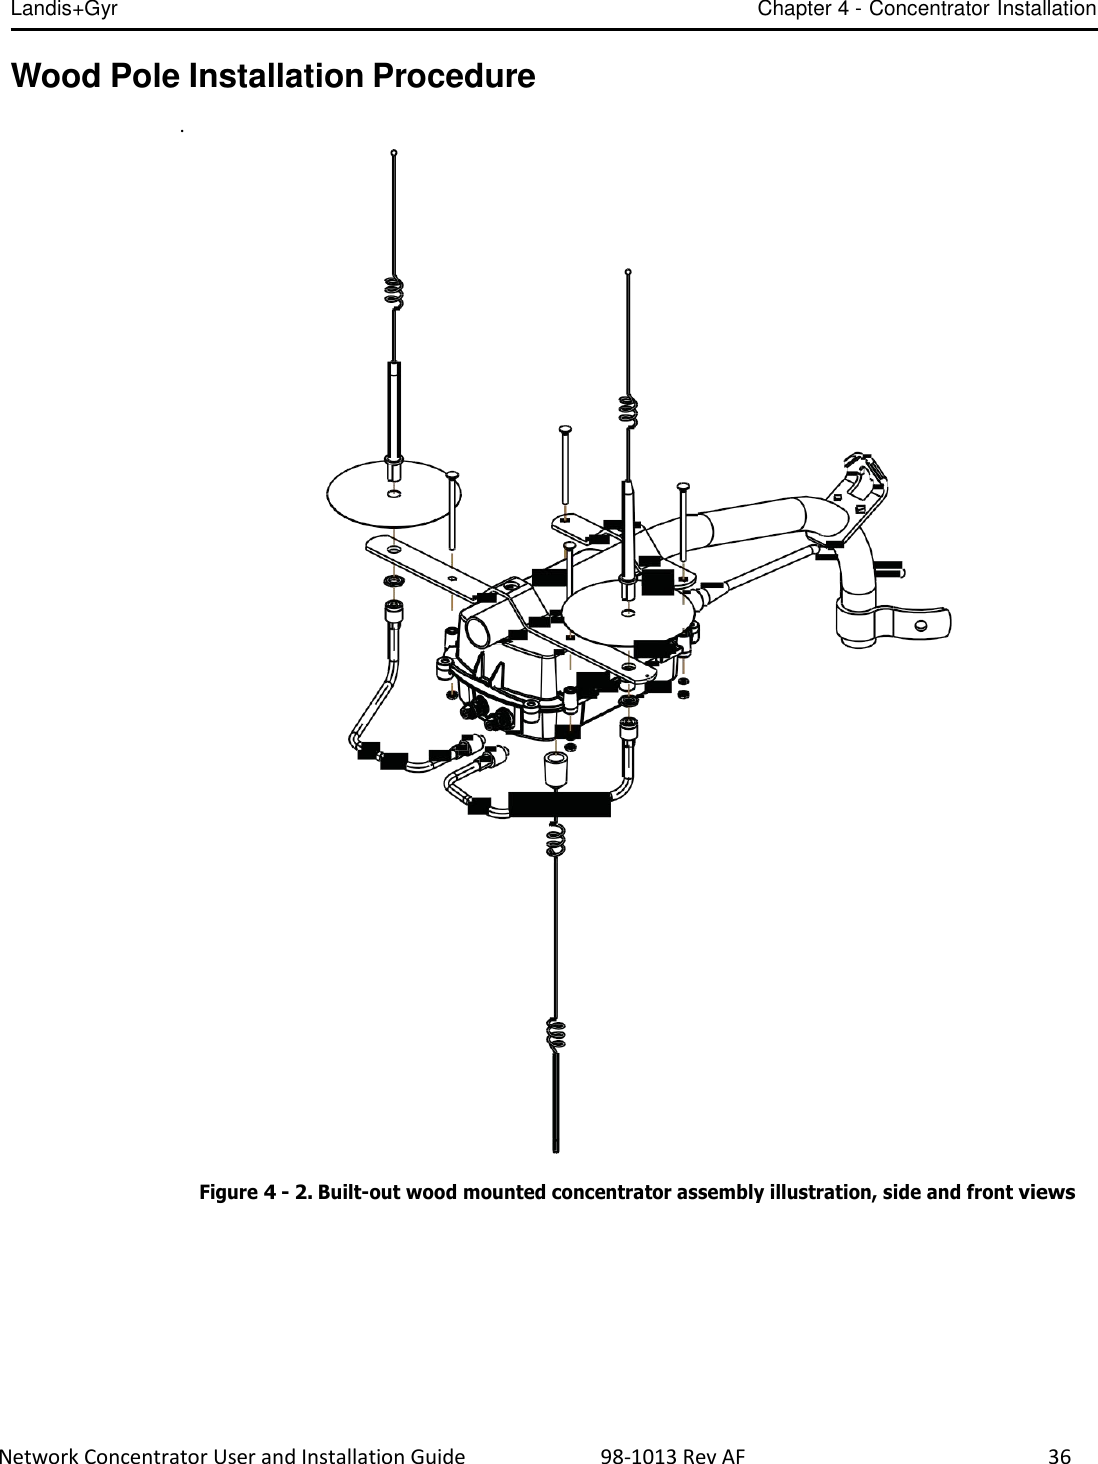 Landis+Gyr Chapter 4 - Concentrator Installation  Network Concentrator User and Installation Guide                          98-1013 Rev AF    36   Wood Pole Installation Procedure  .    Figure 4 - 2. Built-out wood mounted concentrator assembly illustration, side and front views 